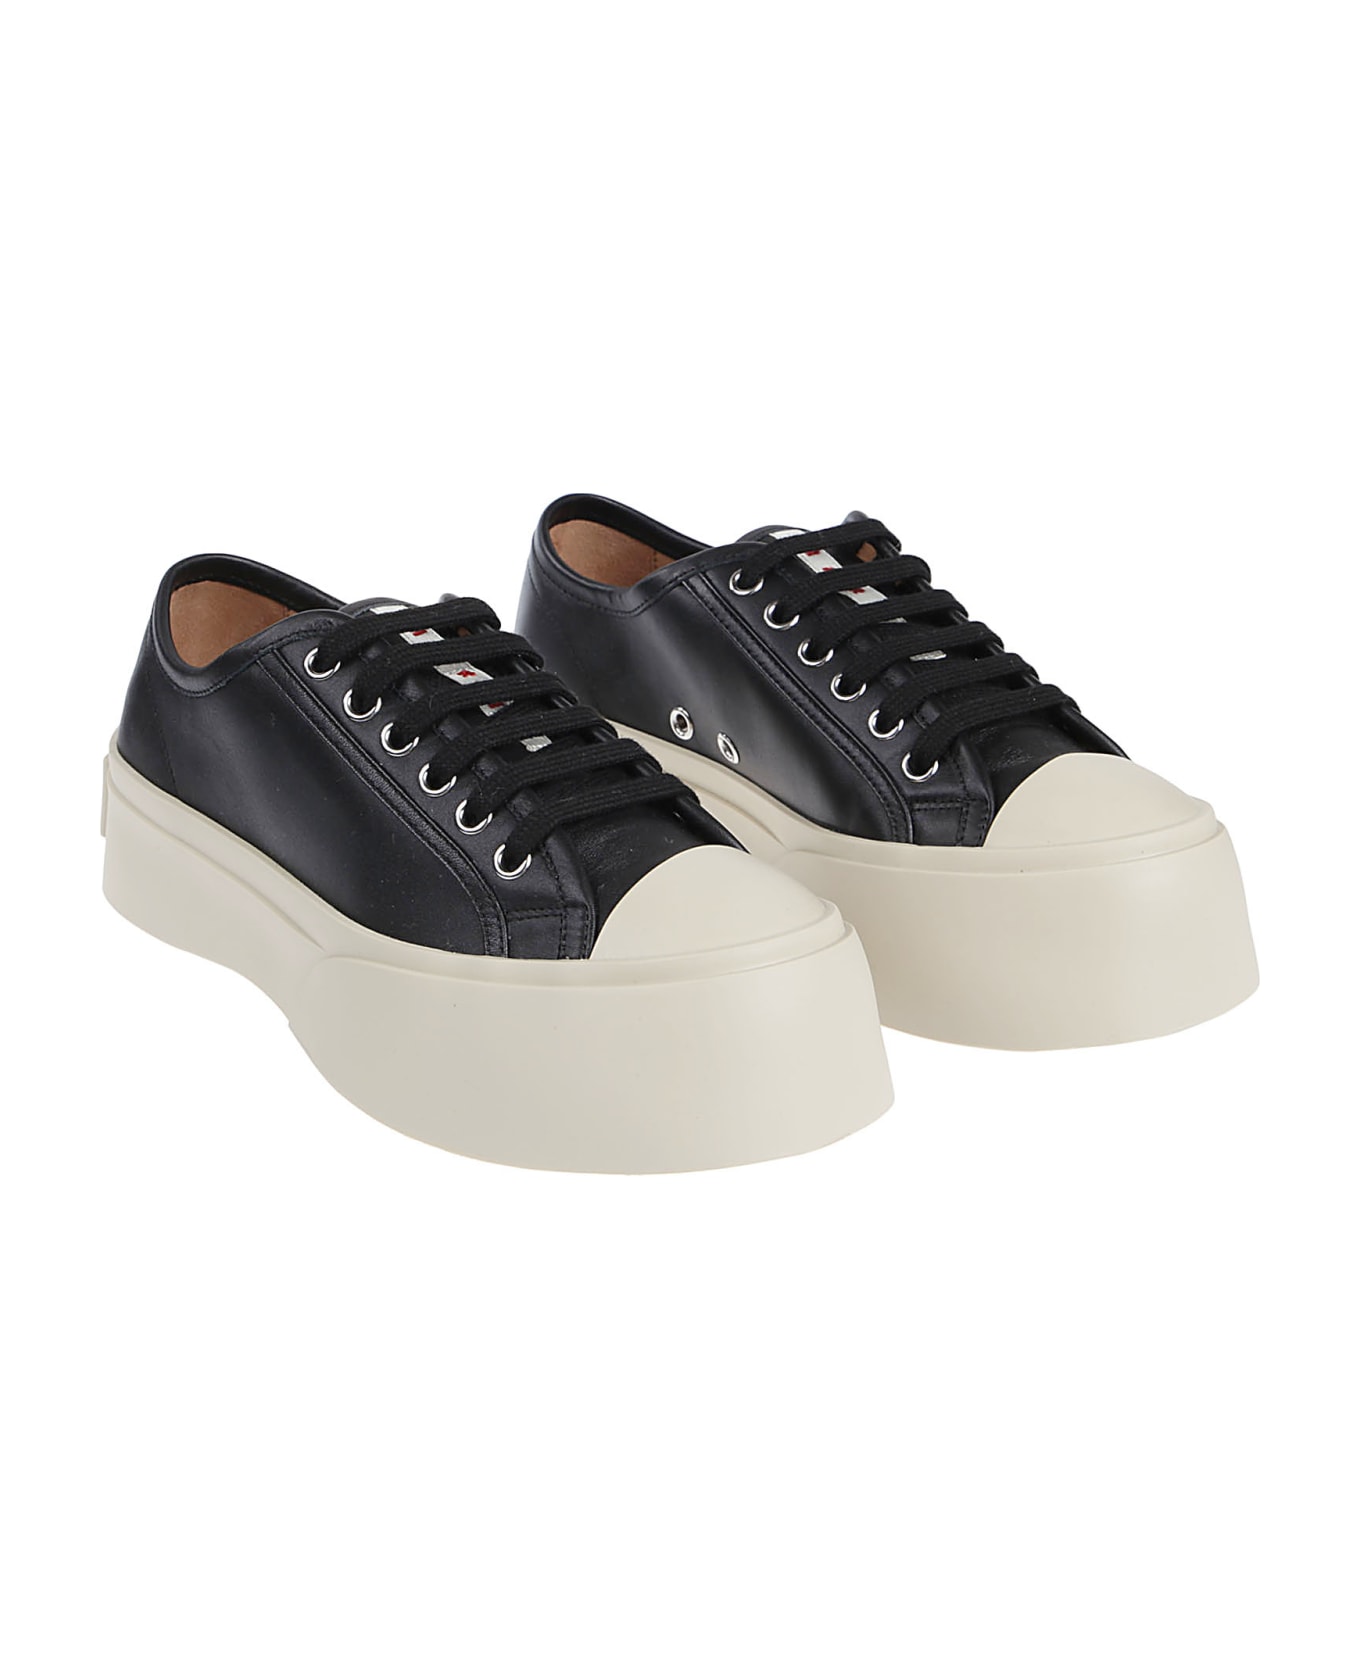 Marni Pablo Lace Up Sneakers - Black